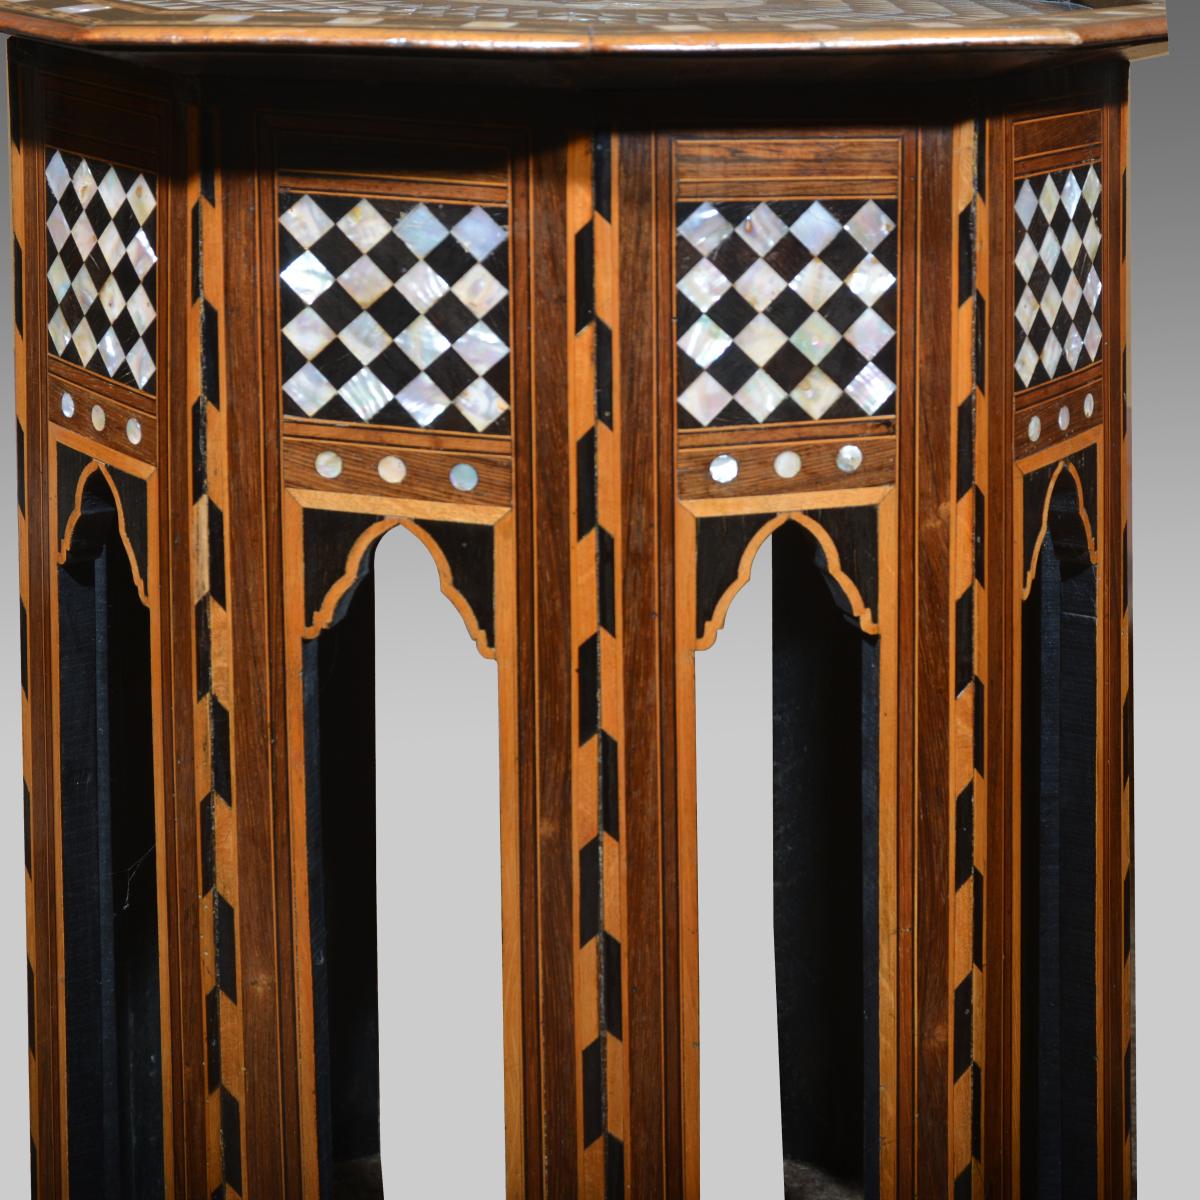 19th century Ottoman mother of pearl inlaid walnut table